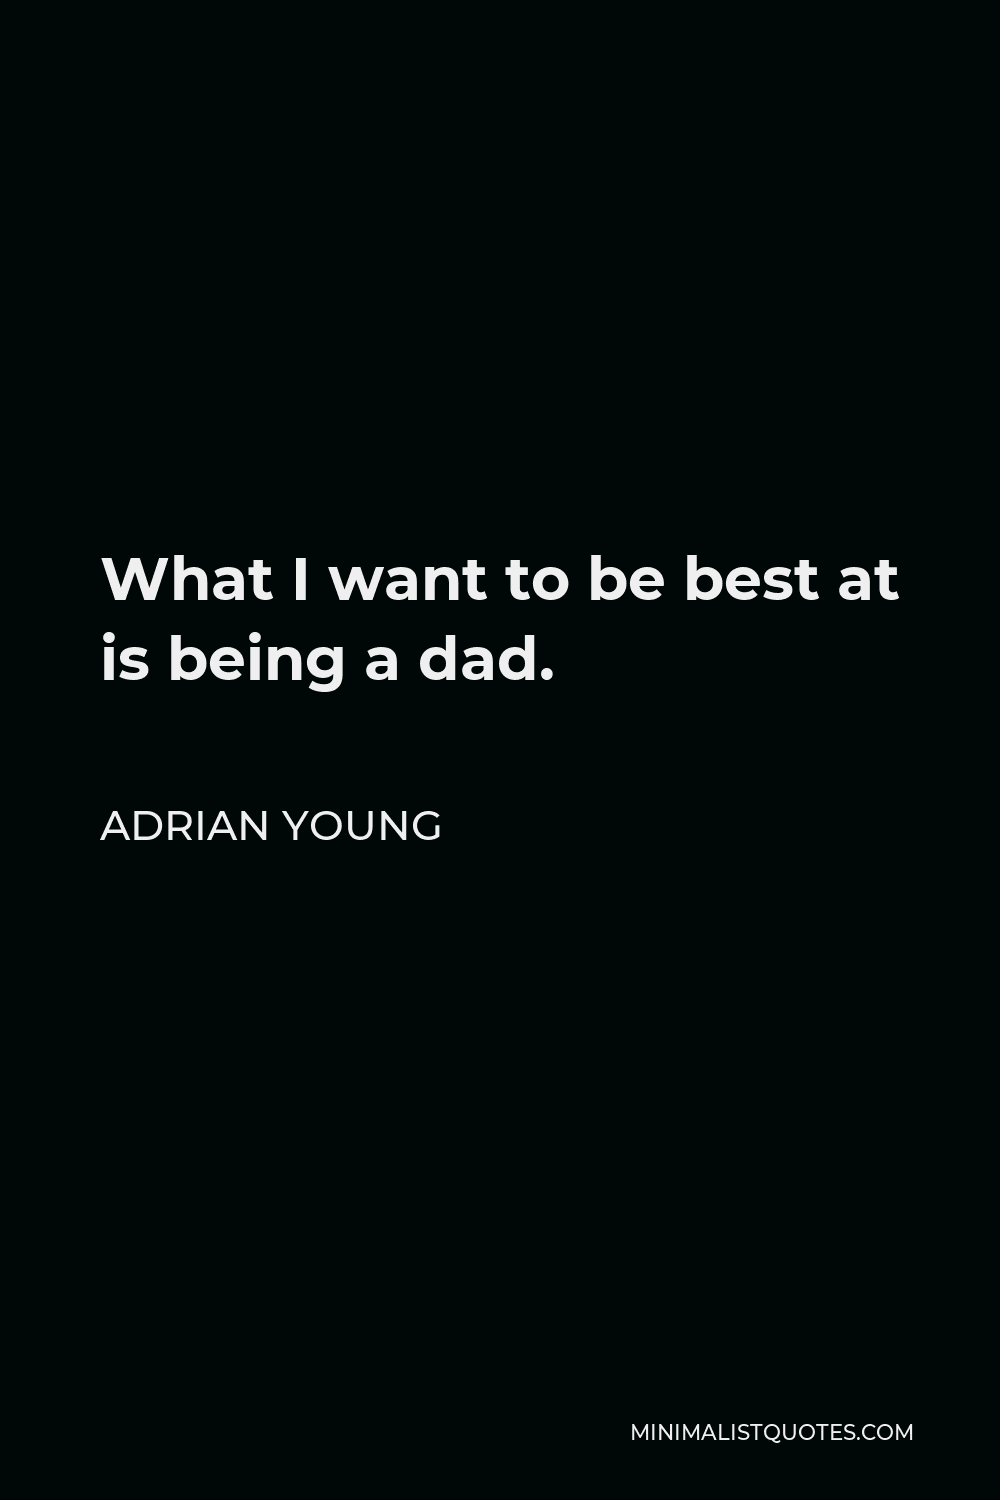 Adrian Young Quote - What I want to be best at is being a dad.